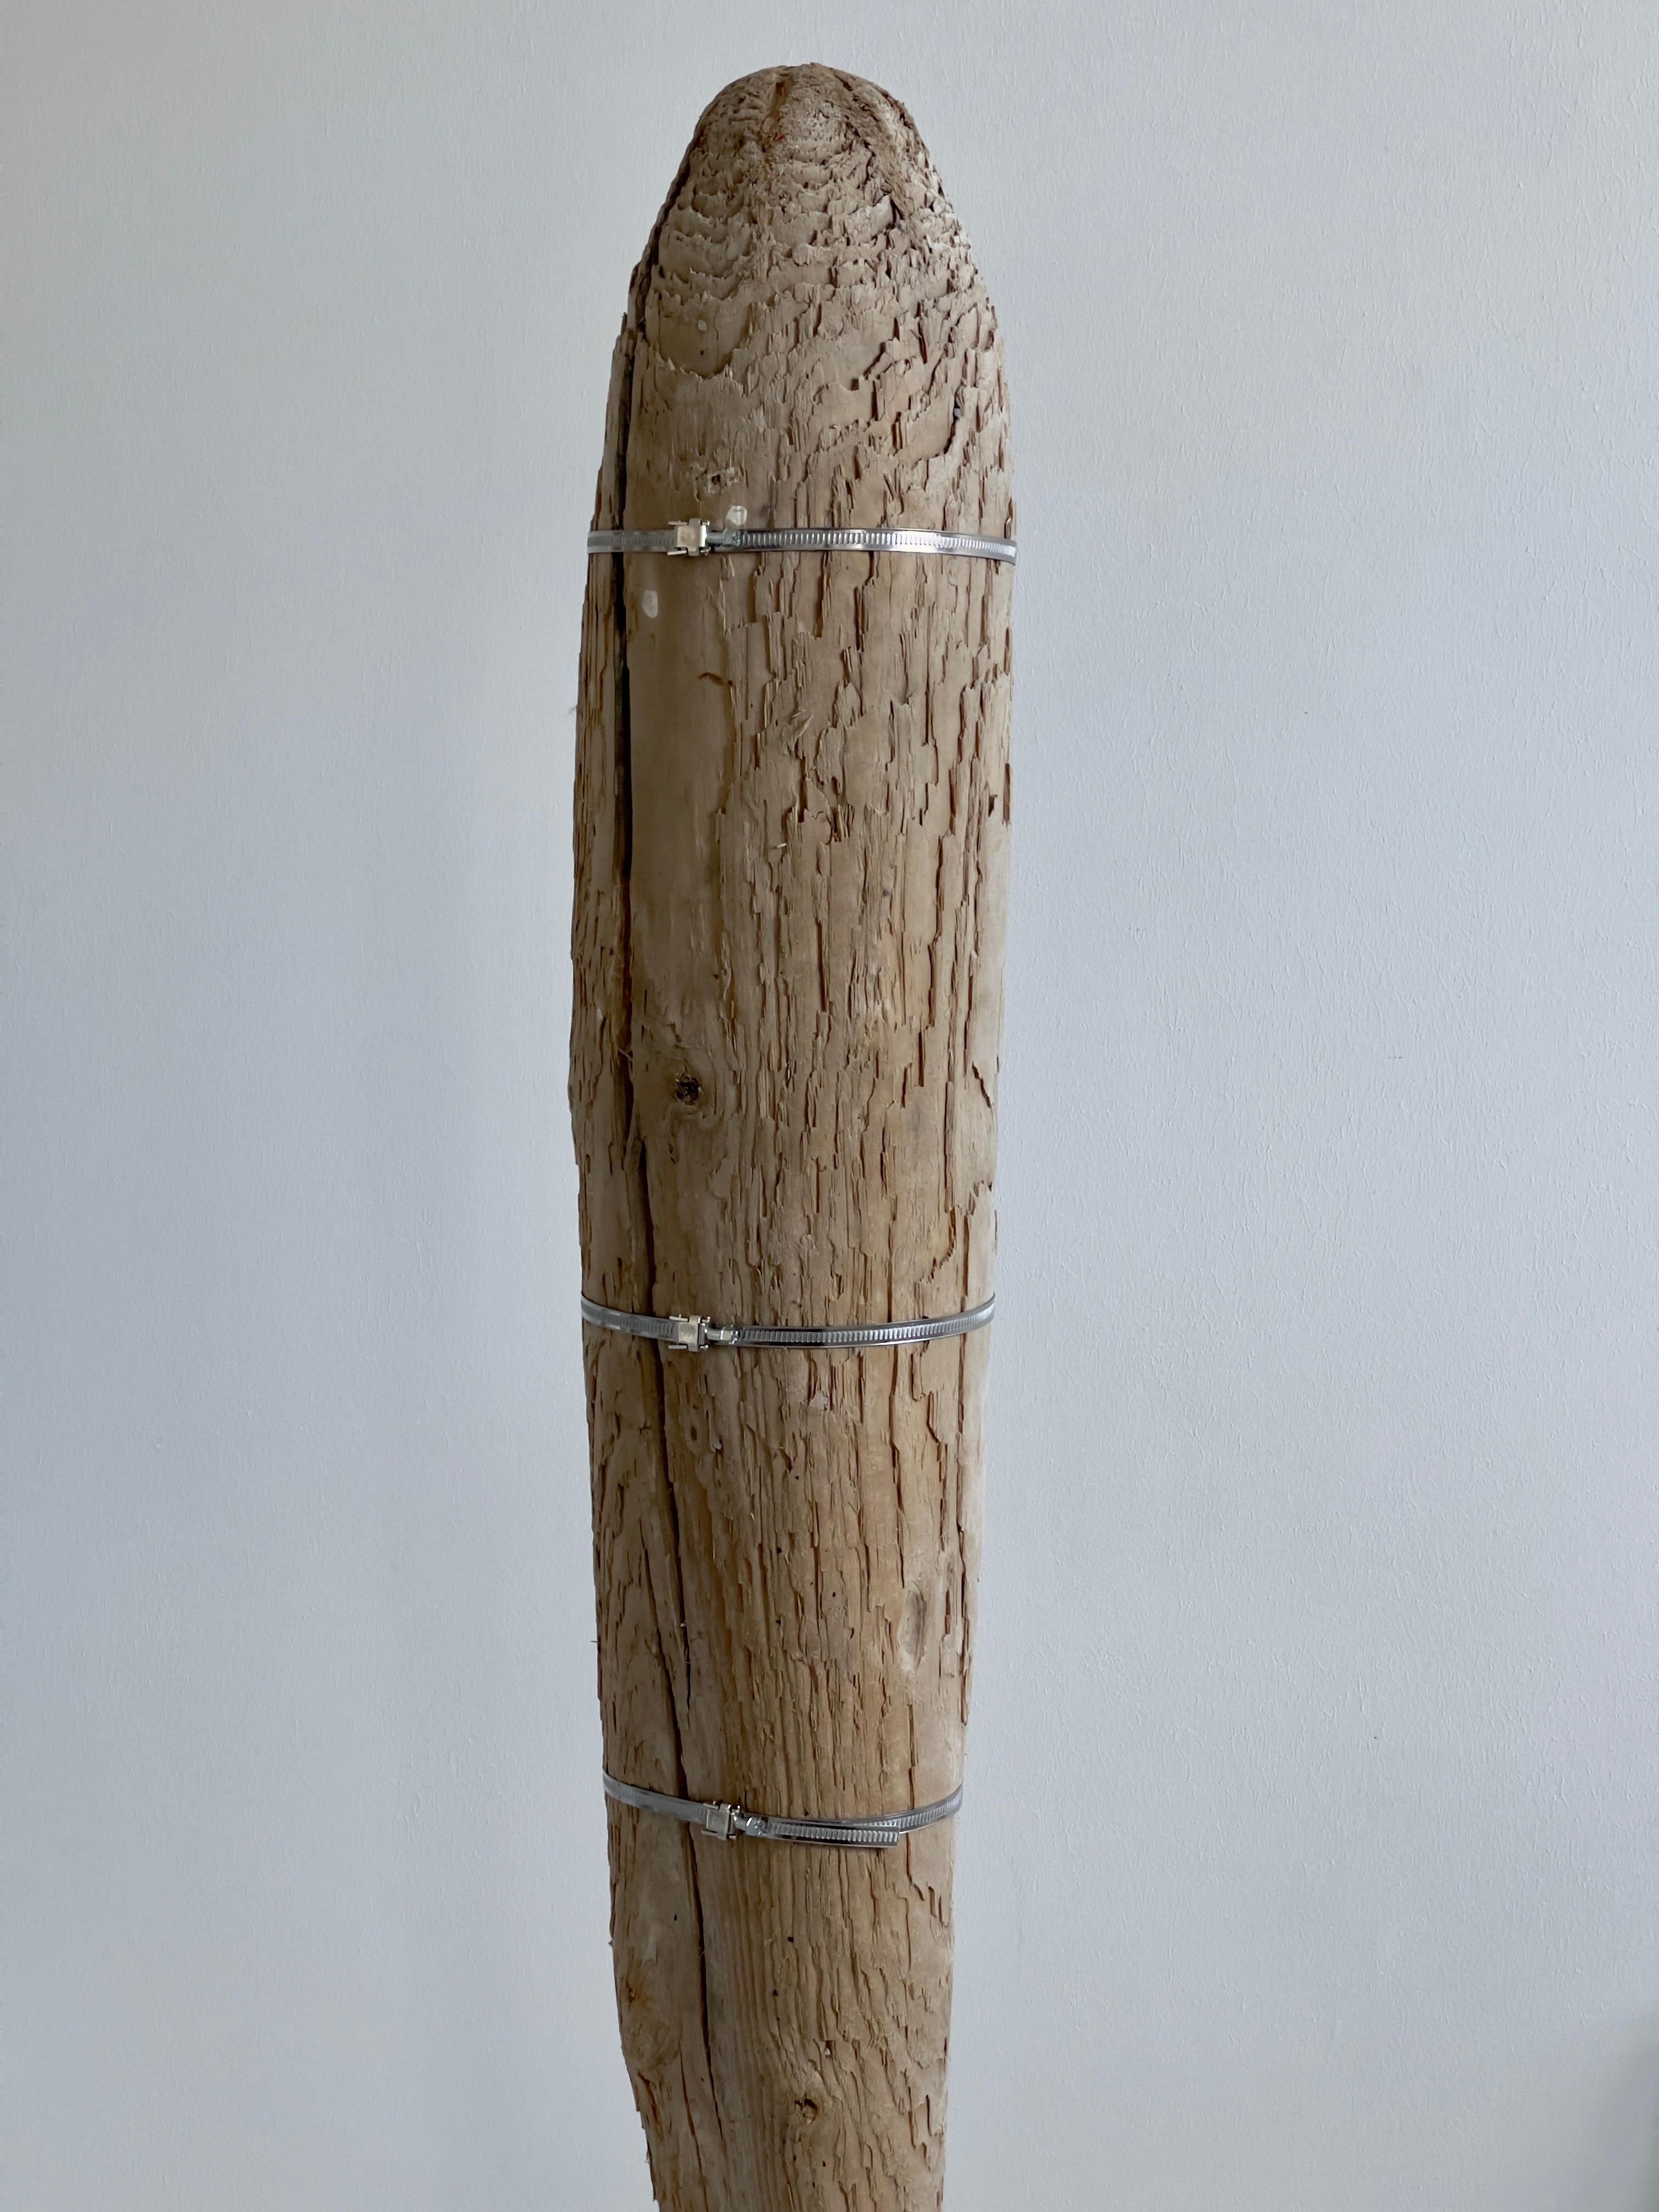 Norwegian  Unique Human Size Decor of a Drift Timber Sculpture on Metal Stand. For Sale